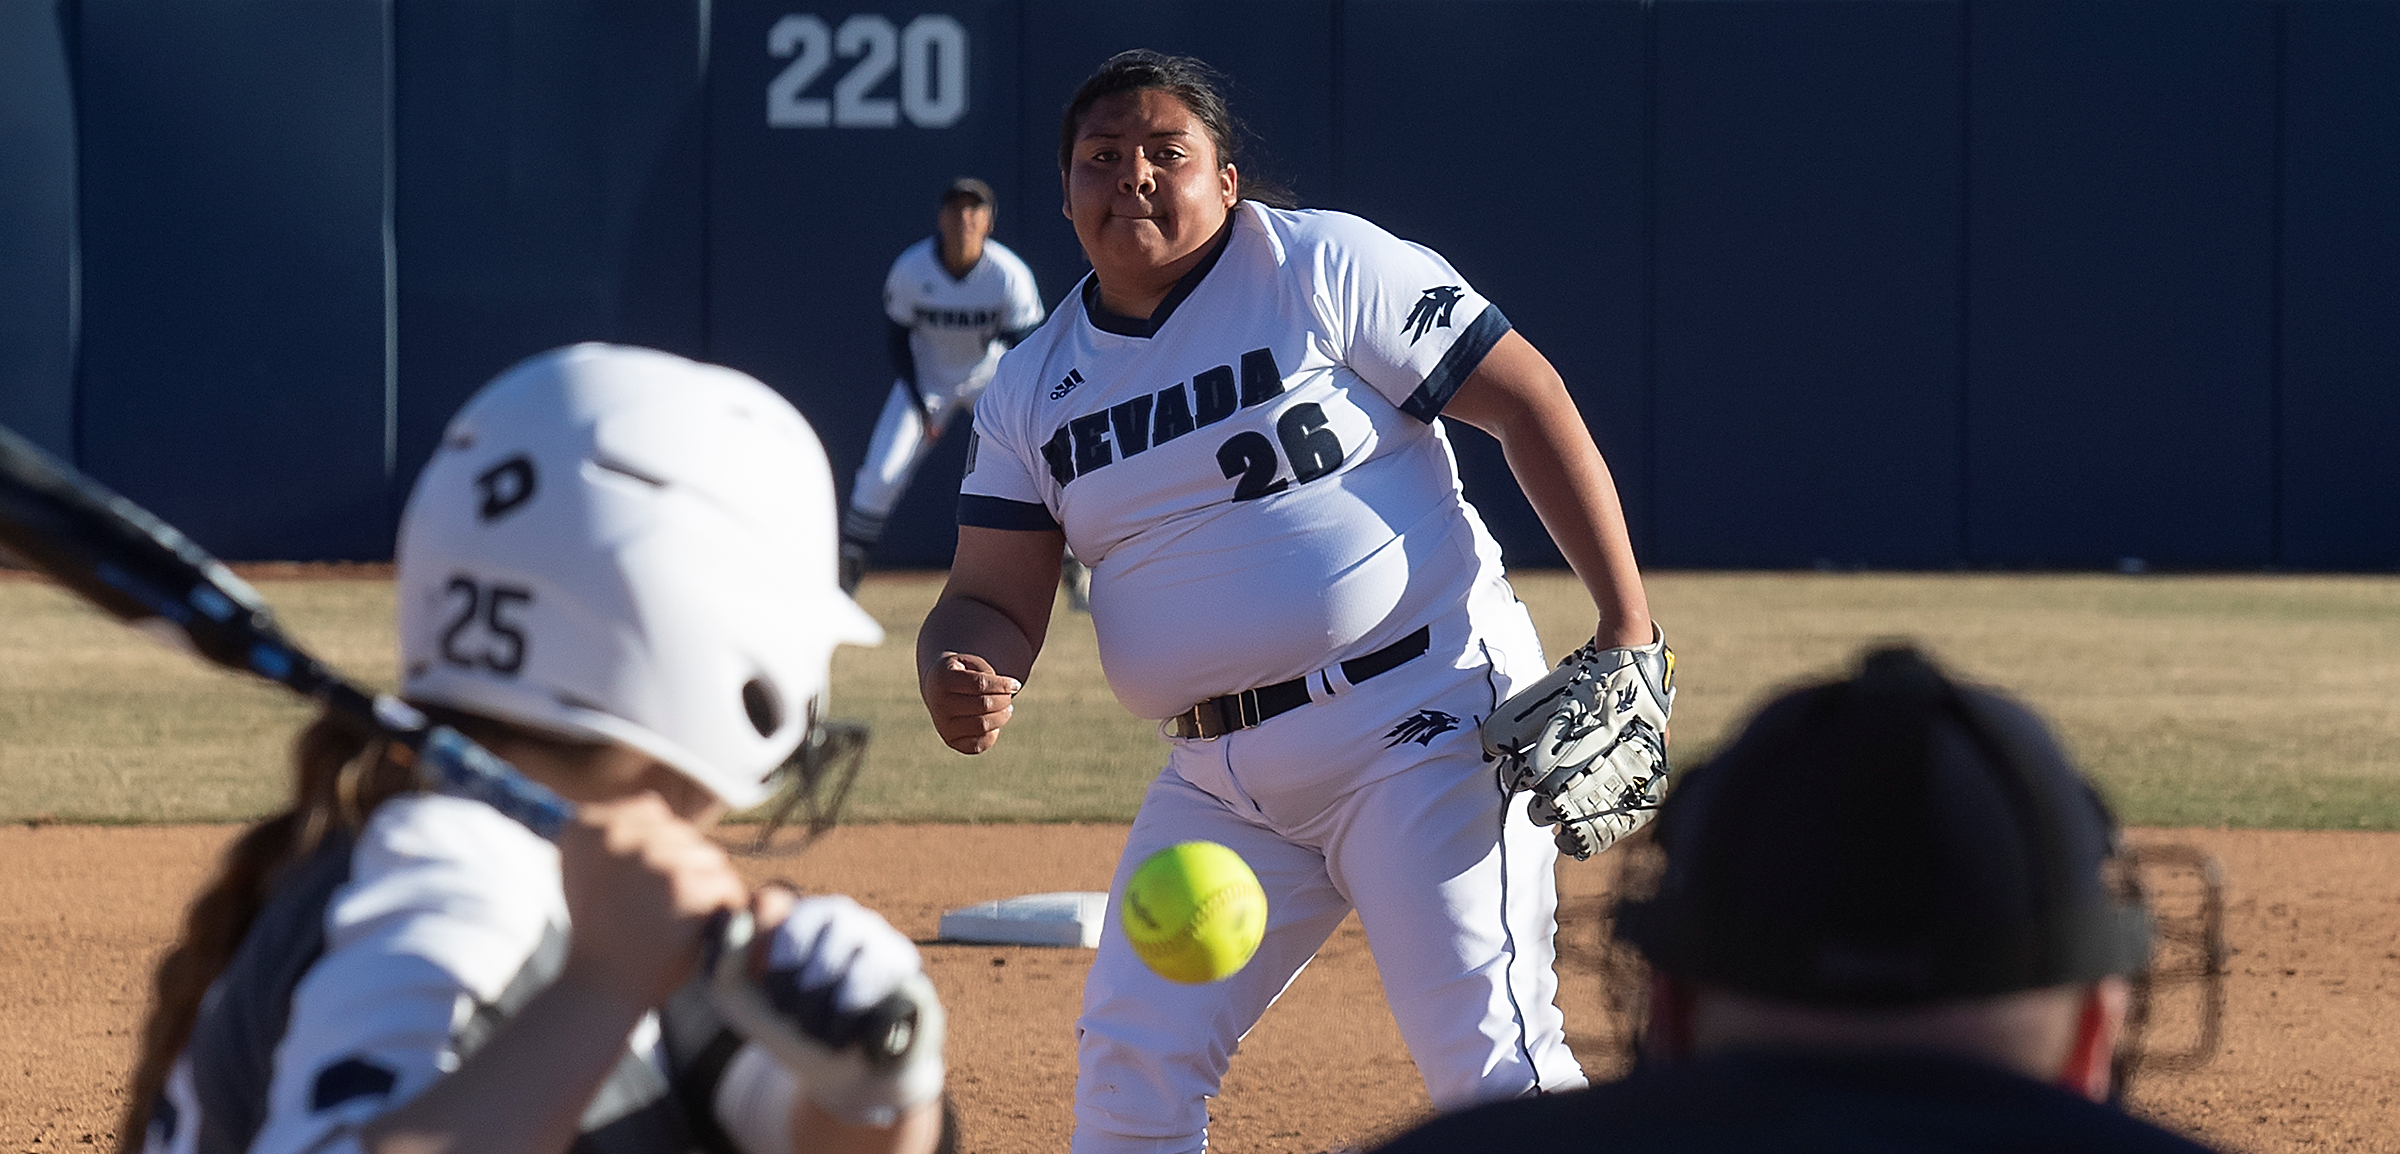 Kali Sargent (Washoe Tribe) completed her third complete game shutout of the year as Nevada took down UNLV, 8-0 in five innings